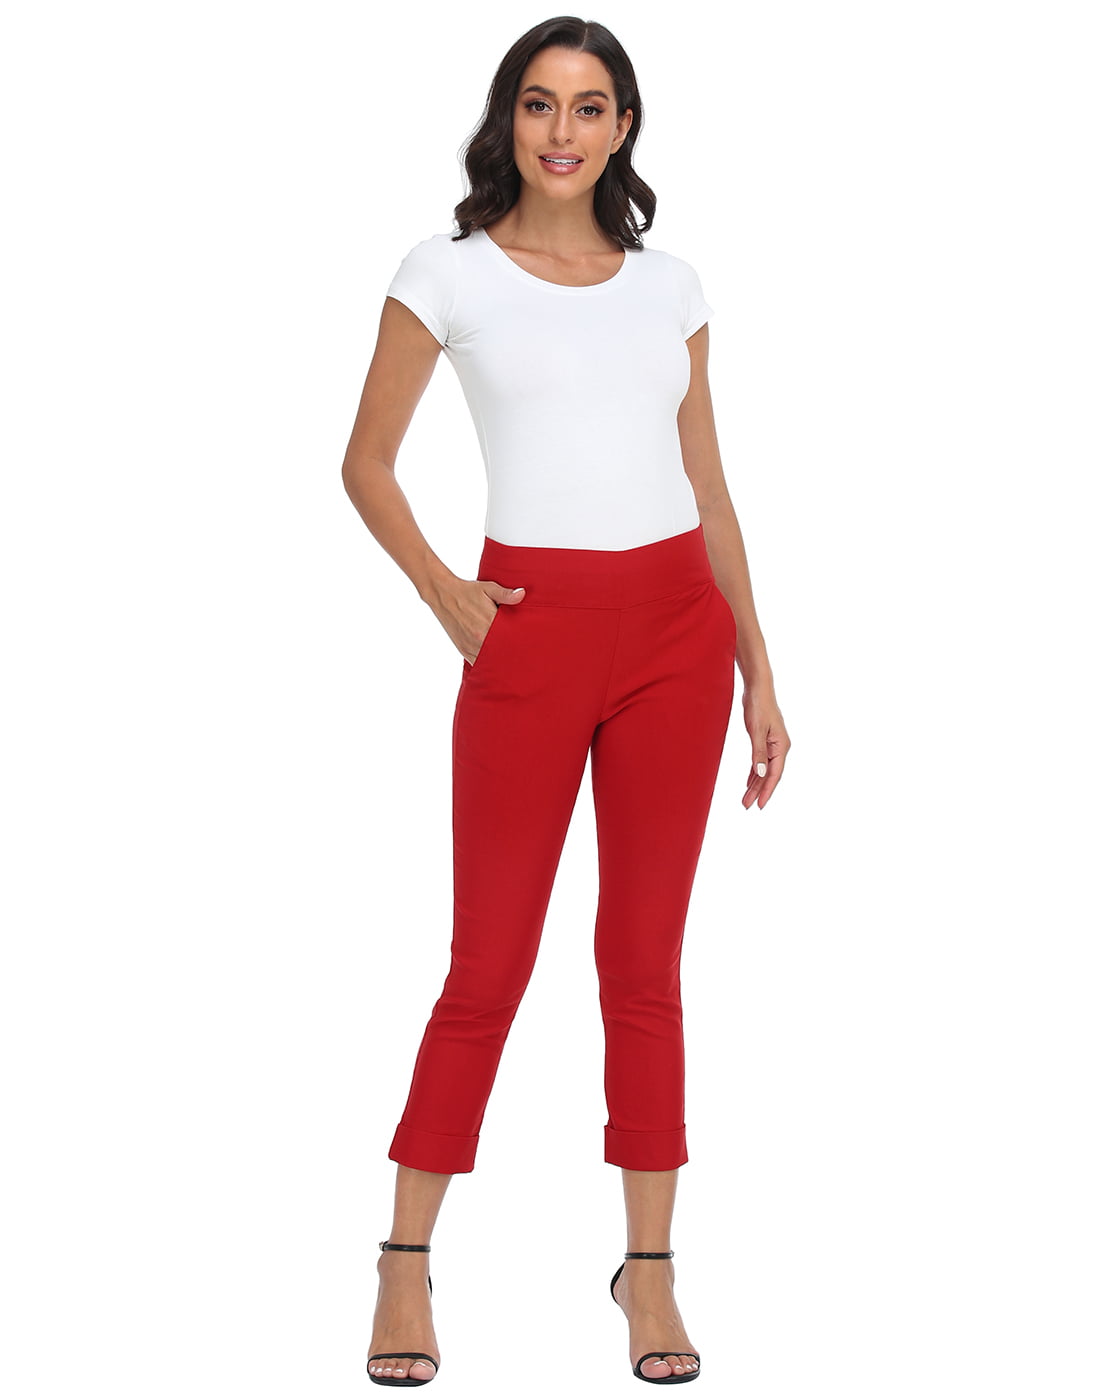 Alfani Red Capris Stretch Cropped Pull On Pants Women's Size 14